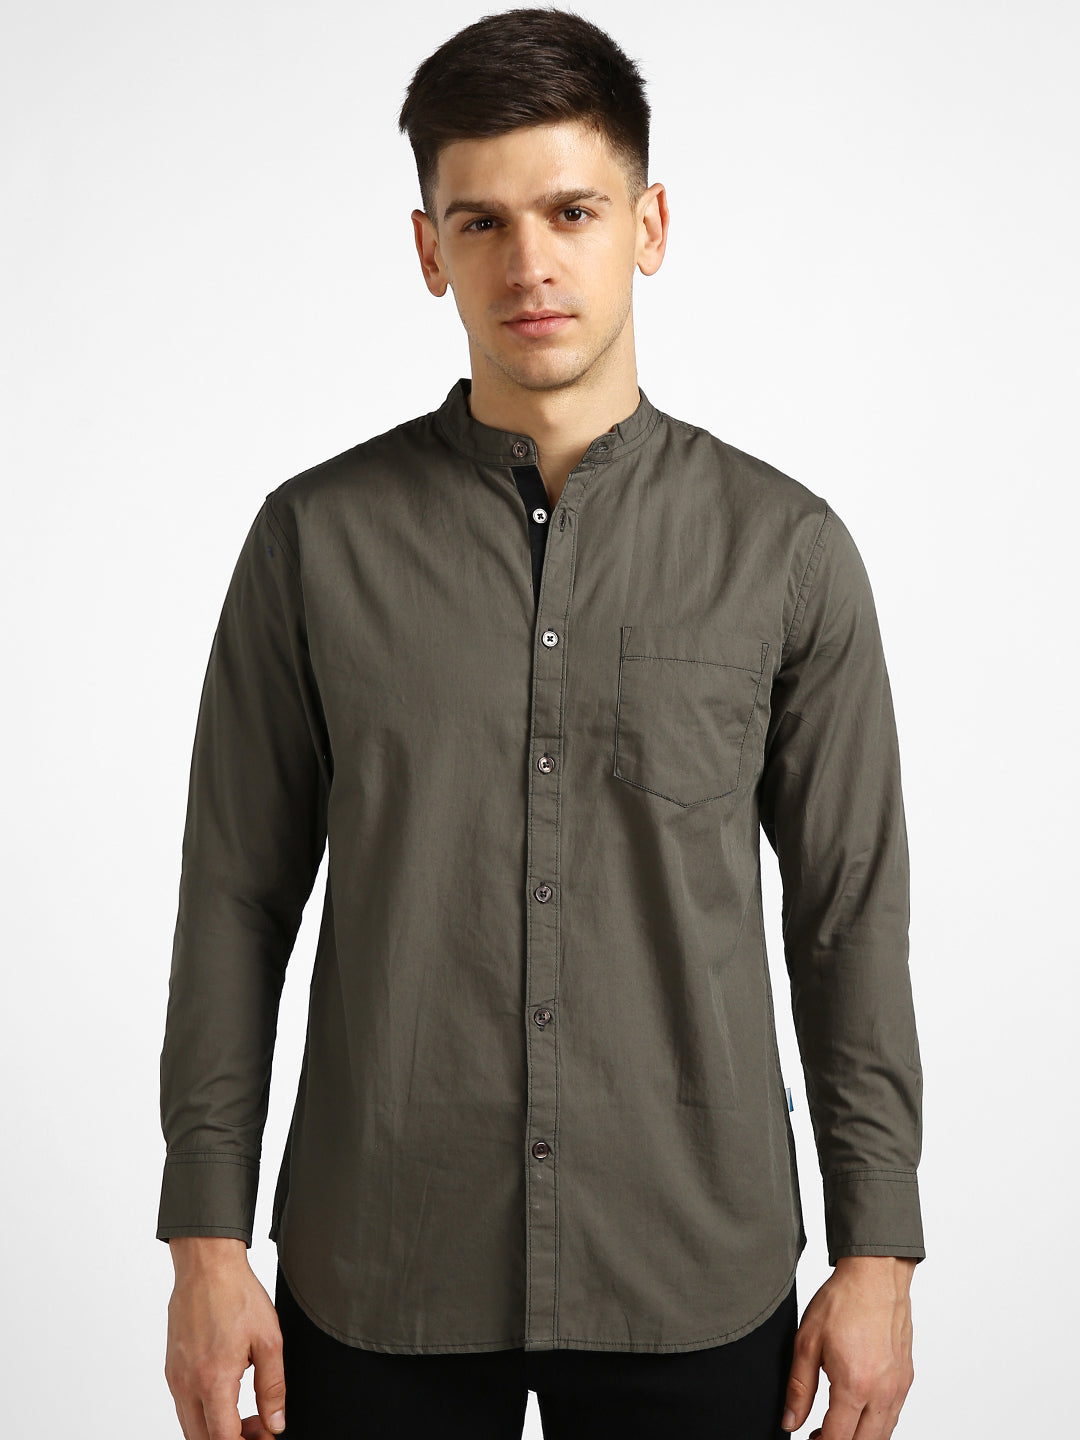 Men's Olive Cotton Full Sleeve Slim Fit Solid Shirt with Mandarin Collar